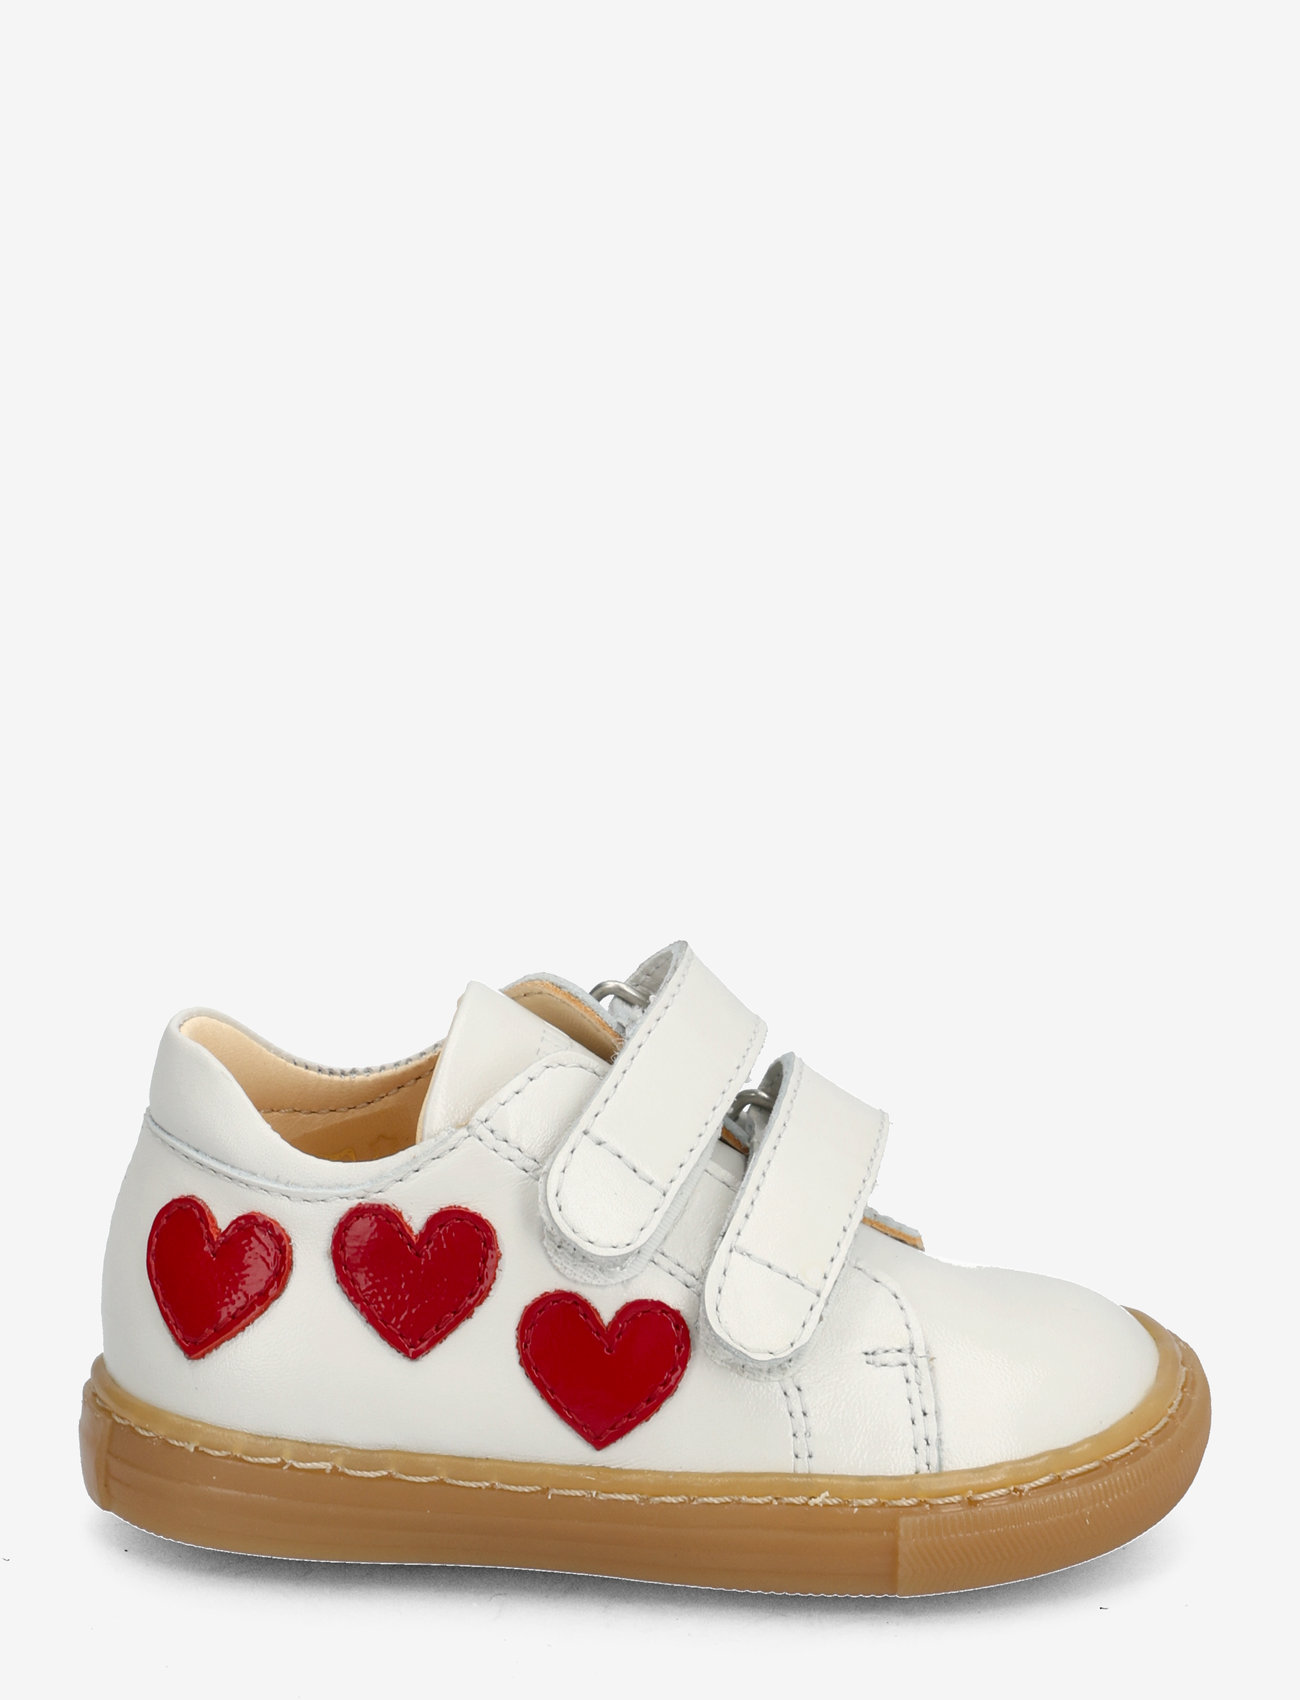 ANGULUS - Shoes - flat - with velcro - sommarfynd - 1493/a003 off white/hearts - 1